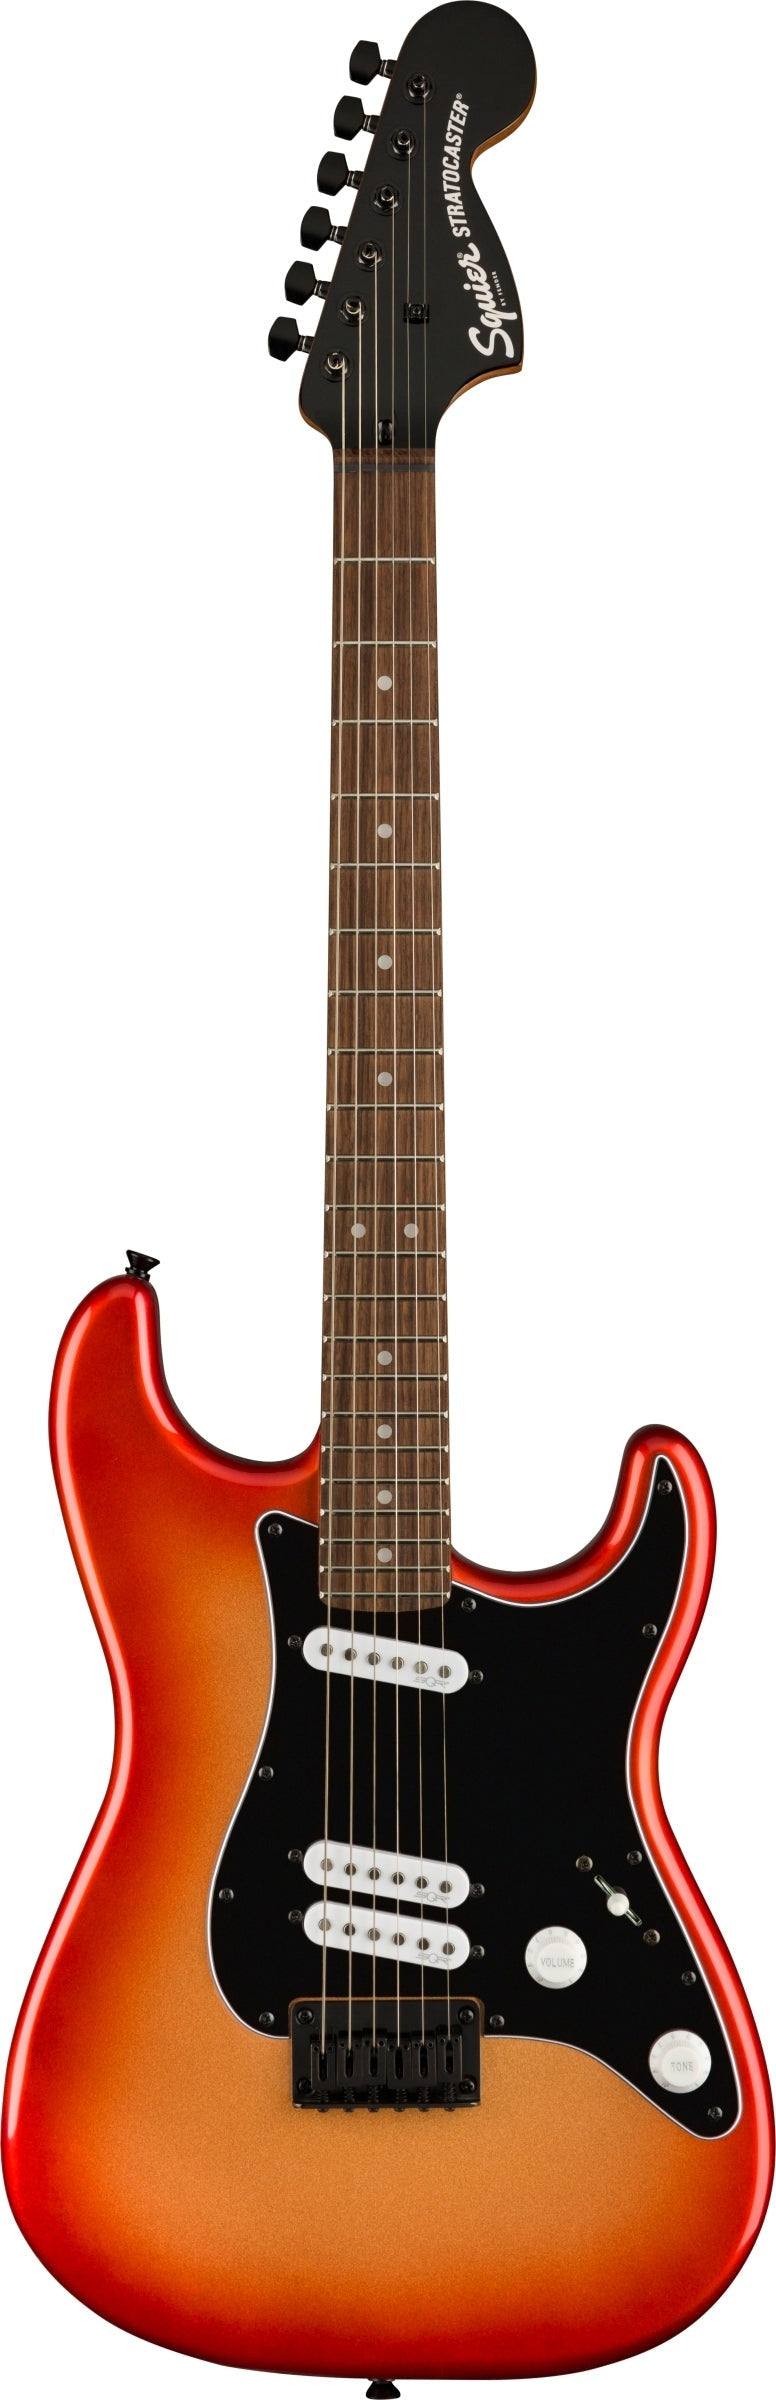 Squier Contemporary Stratocaster Special HT Electric Guitar - Sunset Metallic